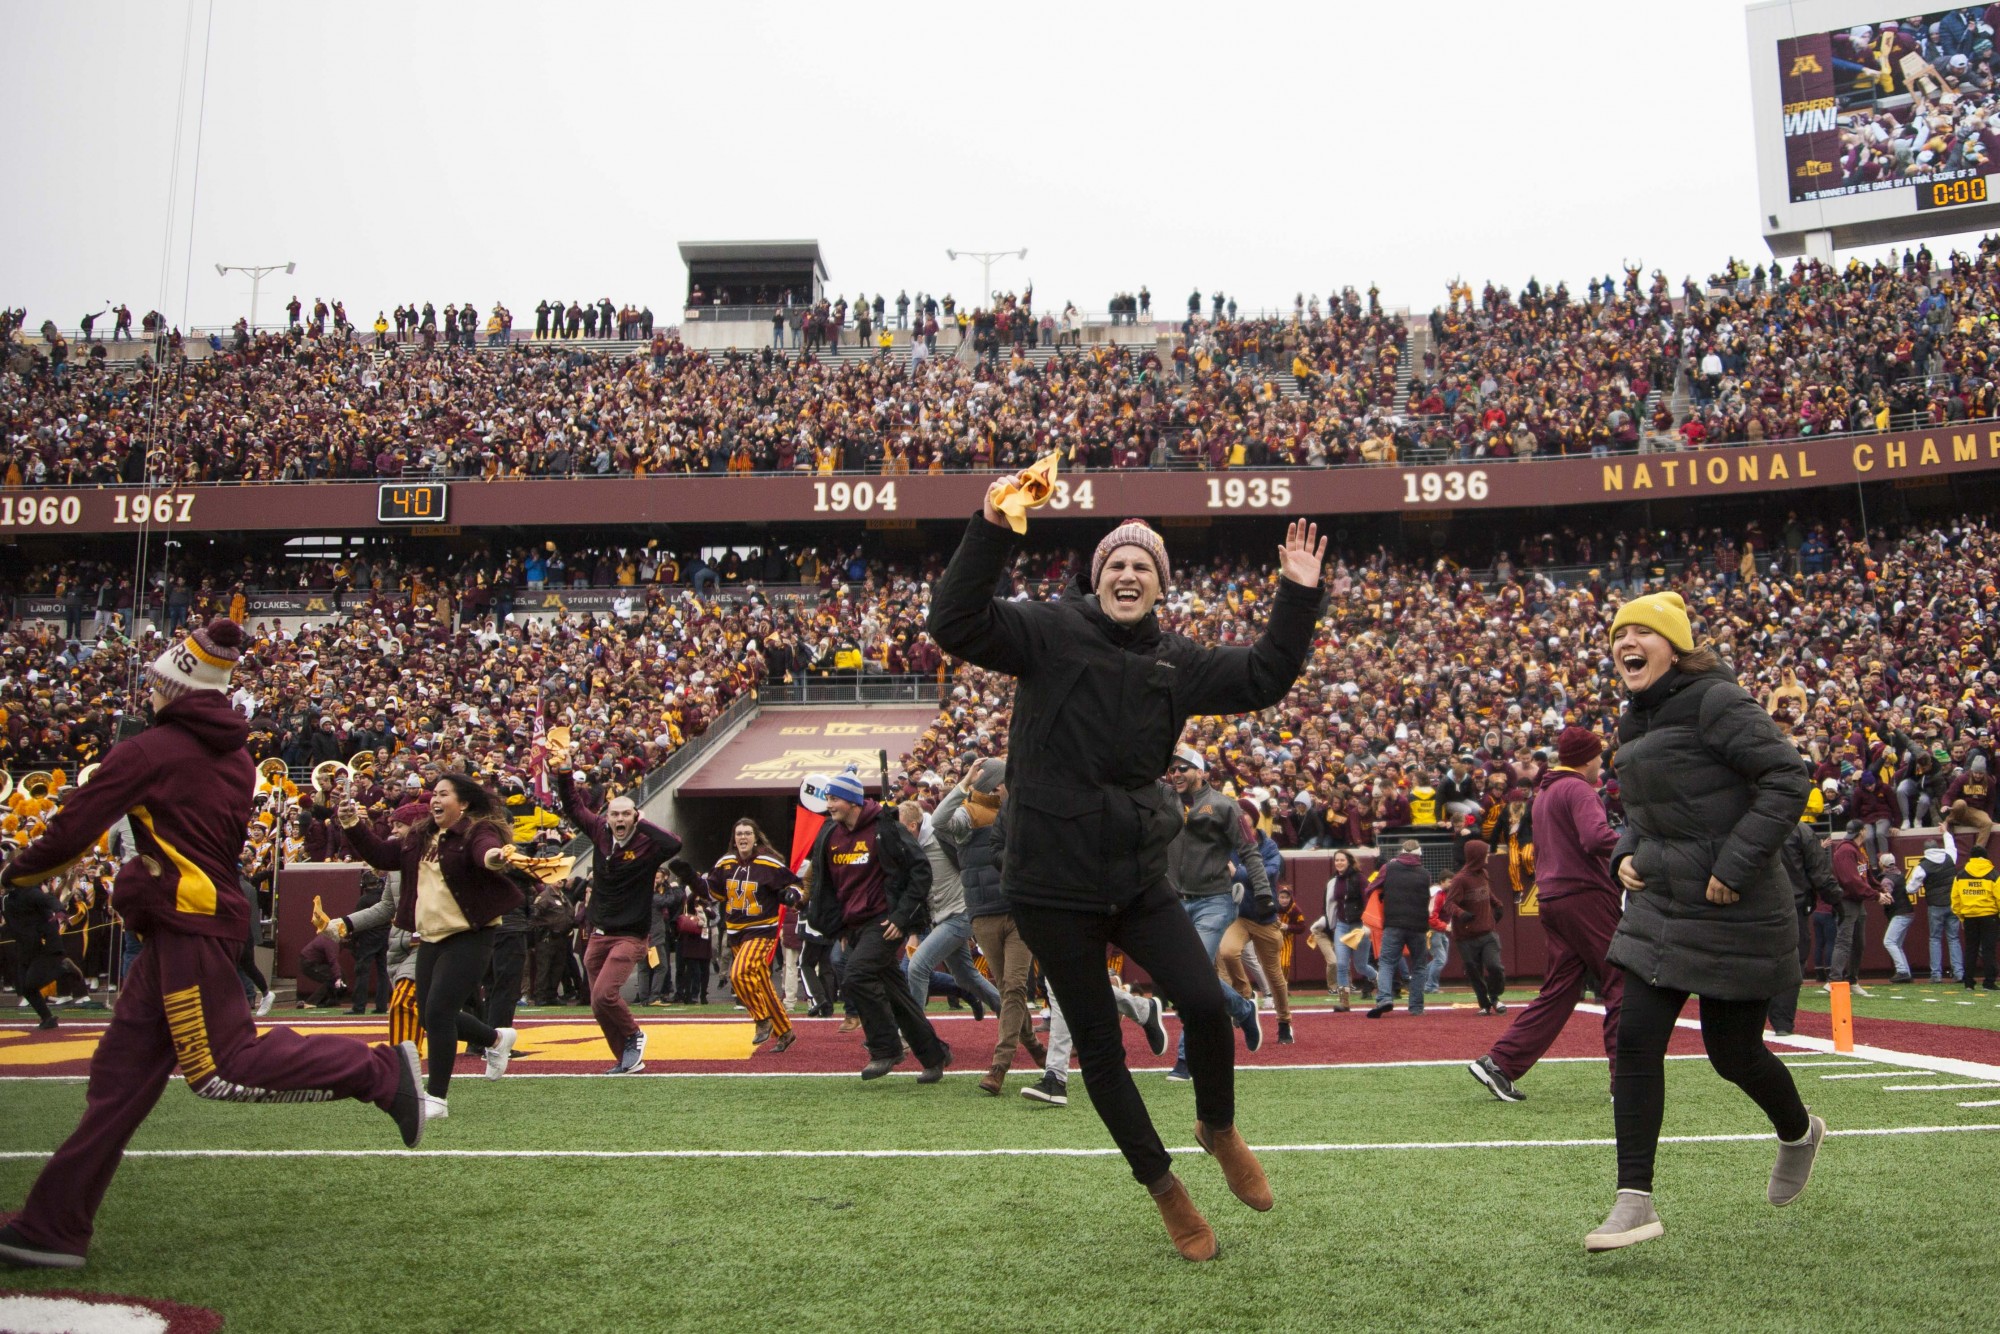 Fans rush the field at TCF Bank Stadium on Saturday, Nov. 9 following the Gophers 31-26 win over Penn State. The win brings their record to 9-0. A first since 1940. 